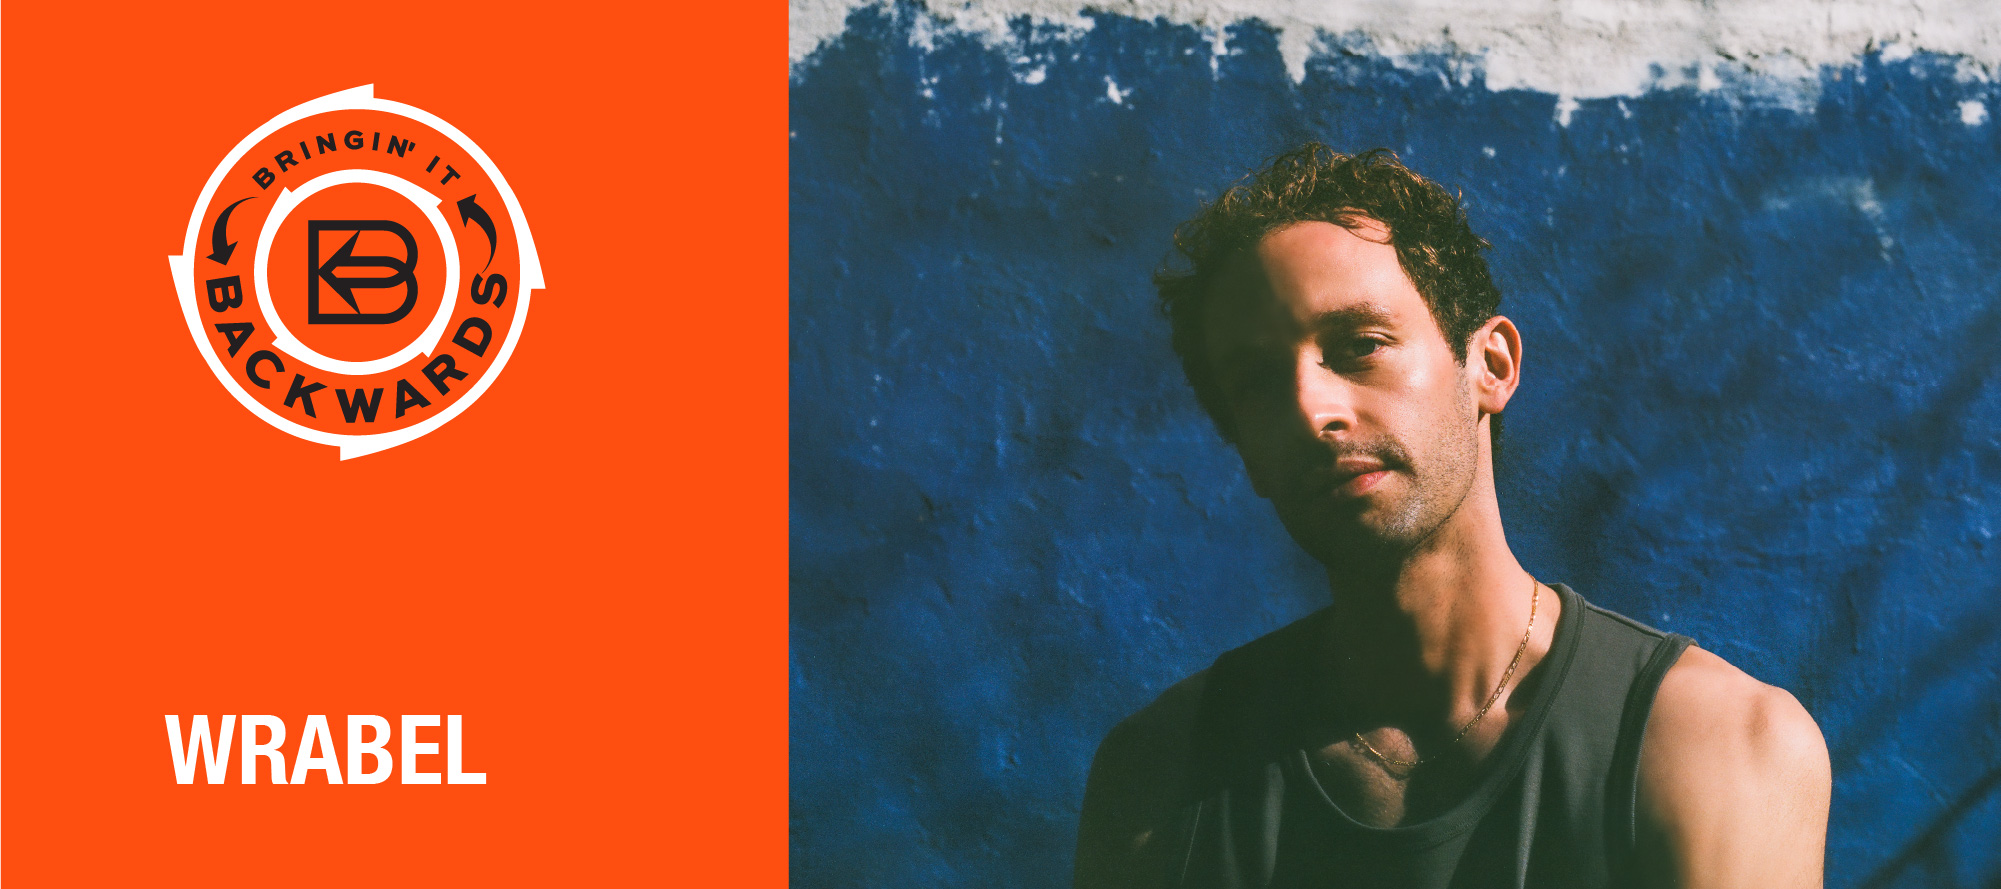 Bringin’ it Backwards: Interview with Wrabel